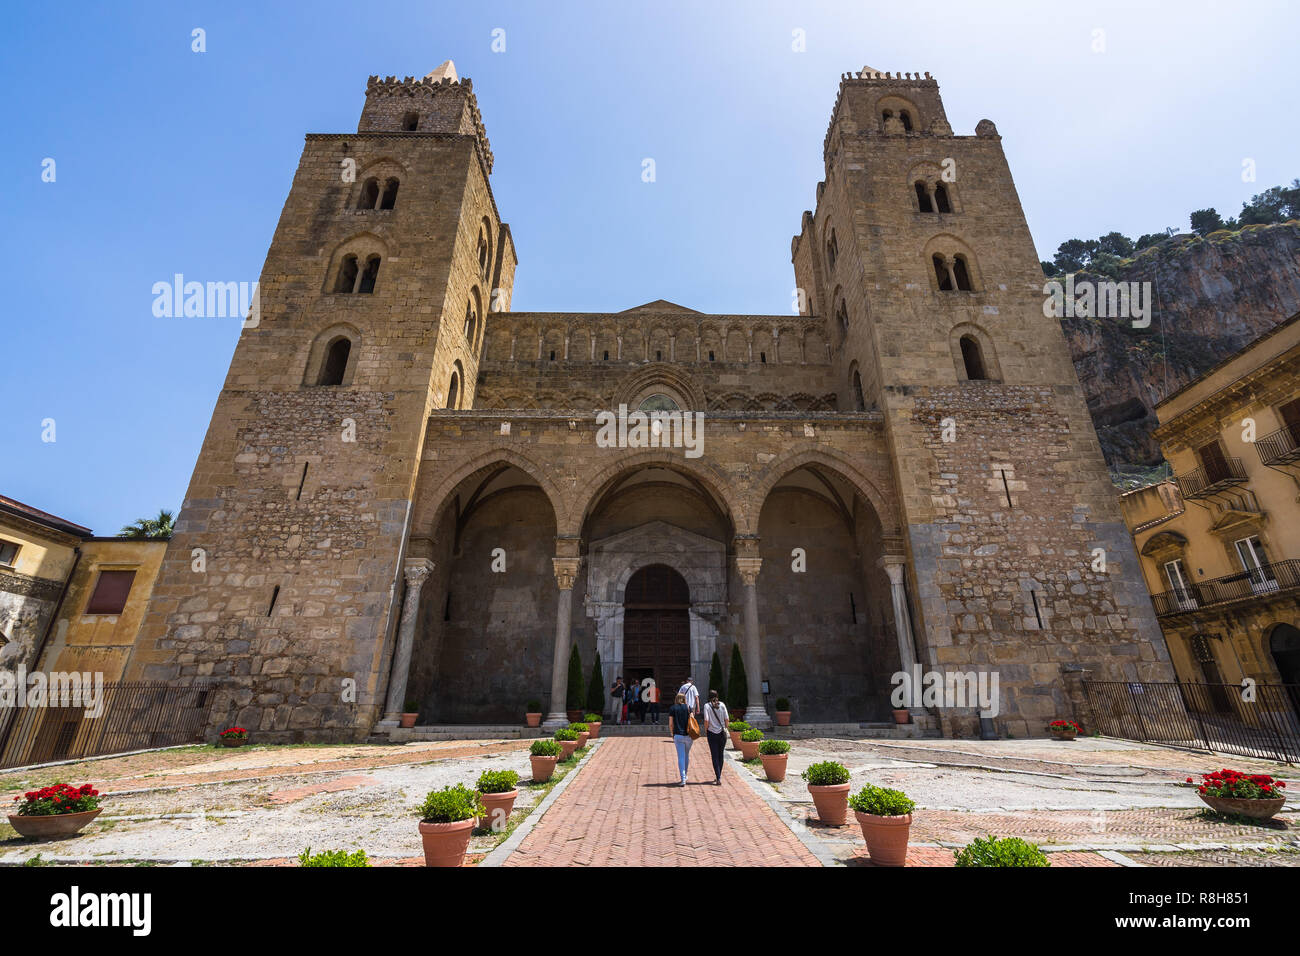 Wide angle view of the façade of the Cathedral of Cefalù, a fine example of Norman architectural style, part of UNESCO Heritage Site, Cefalù, Italy Stock Photo